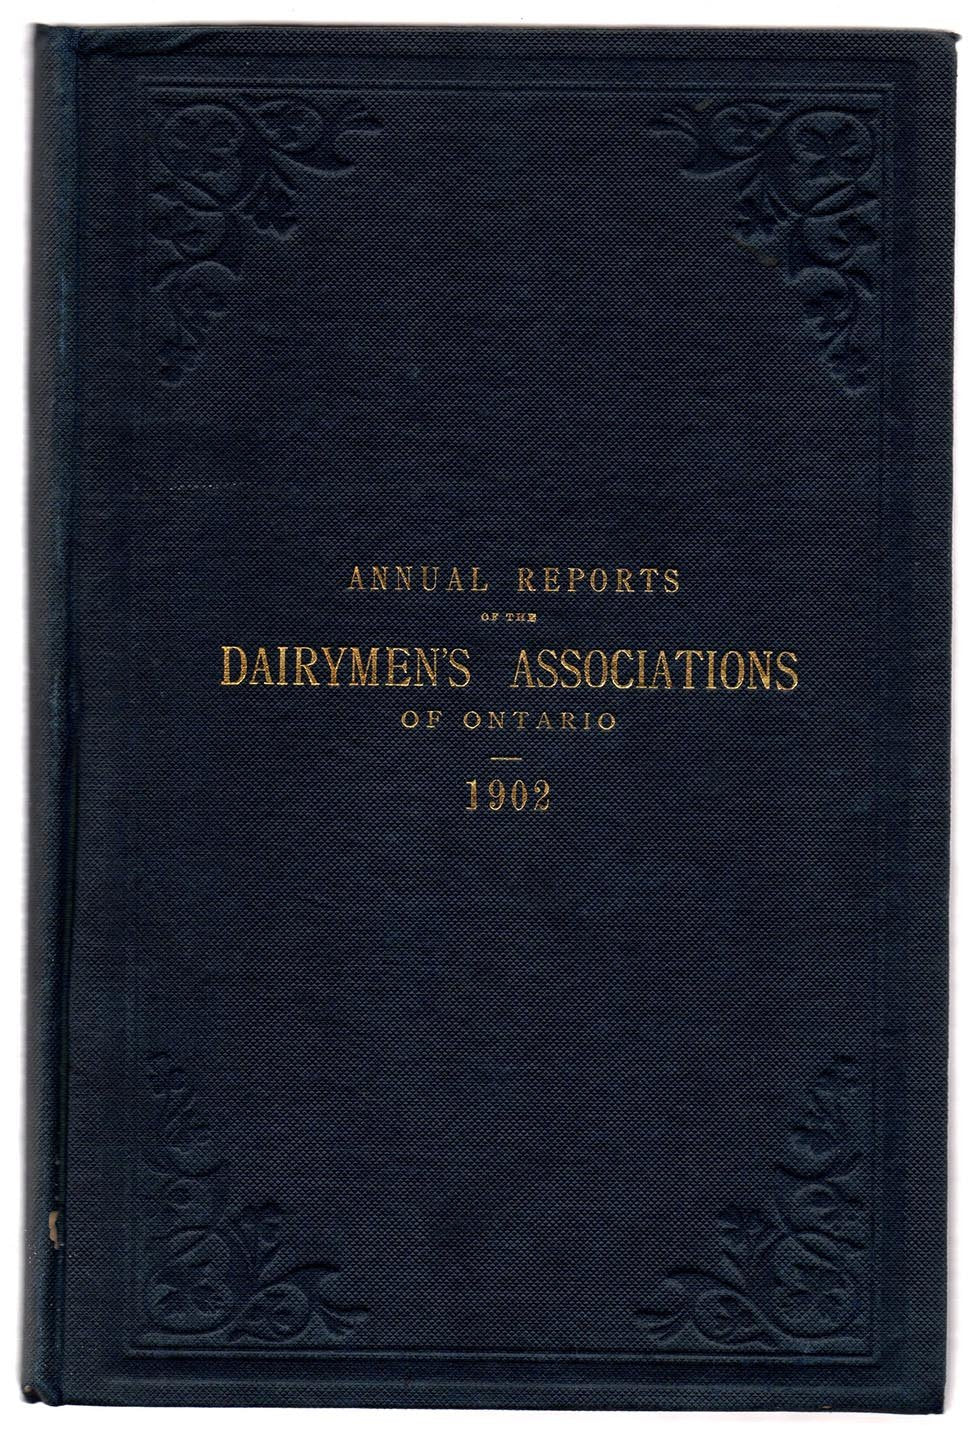 Annual Reports of the Dairymen's Associations of the Province of Ontario, 1902